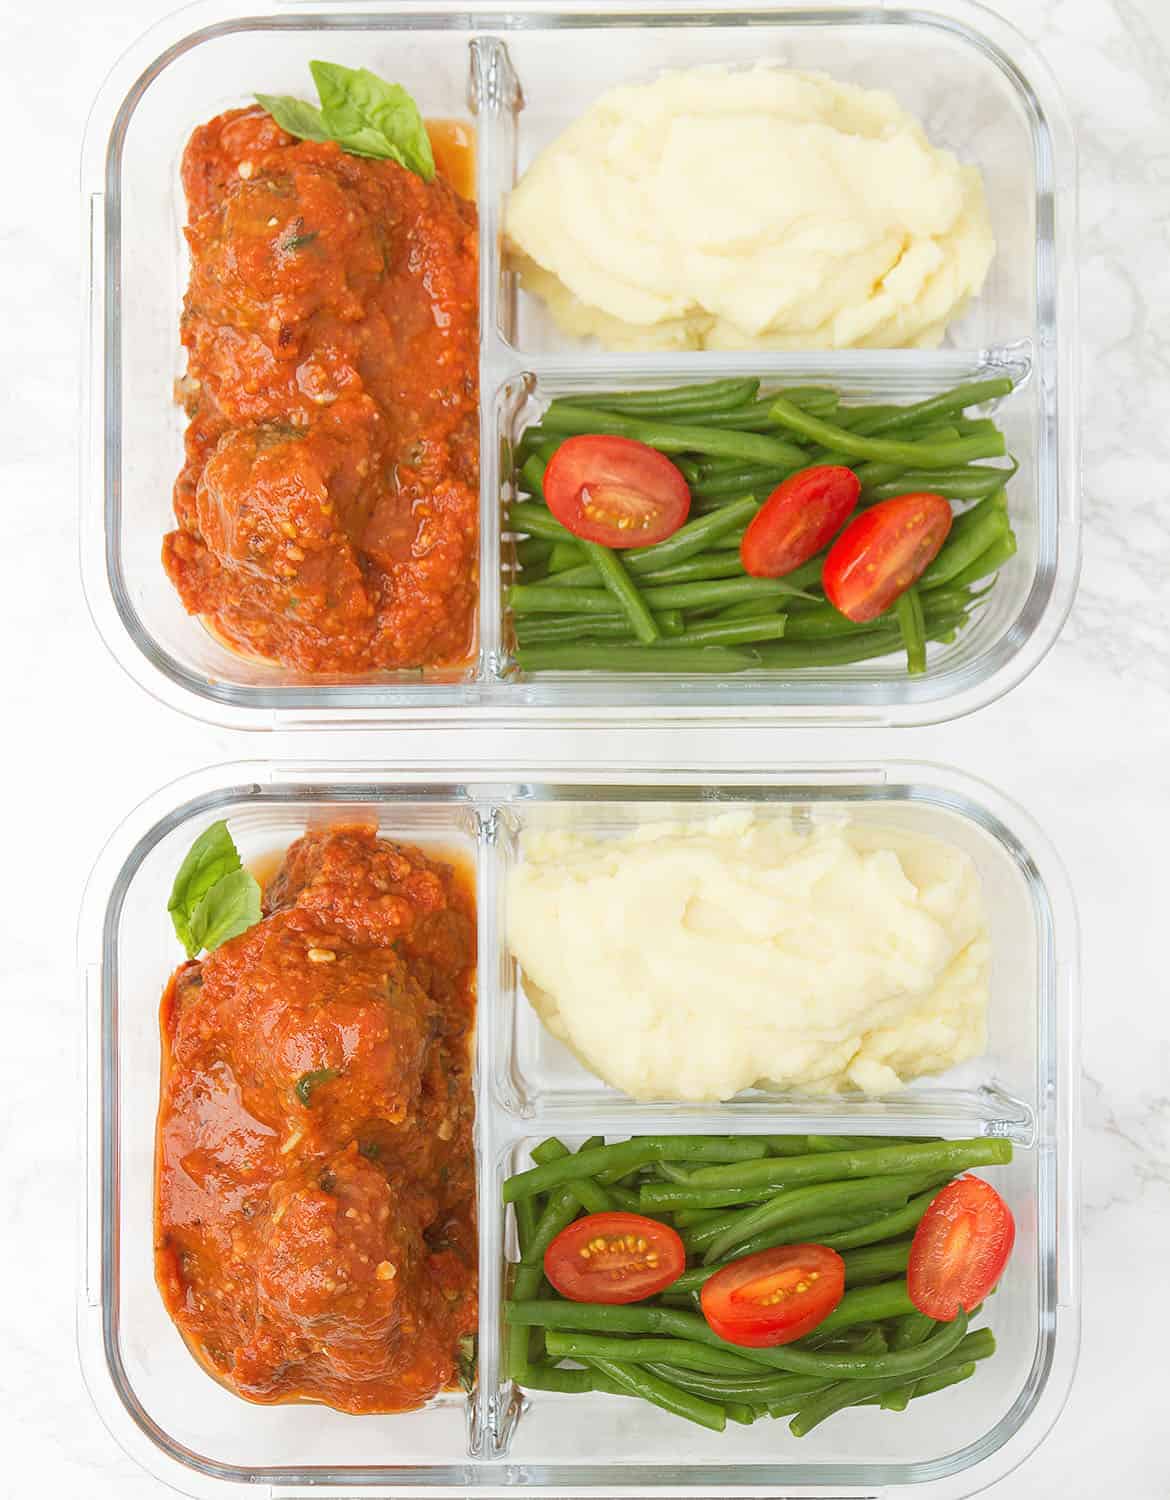 vegan meatballs in meal prep containers with mashed potatoes and green beans.